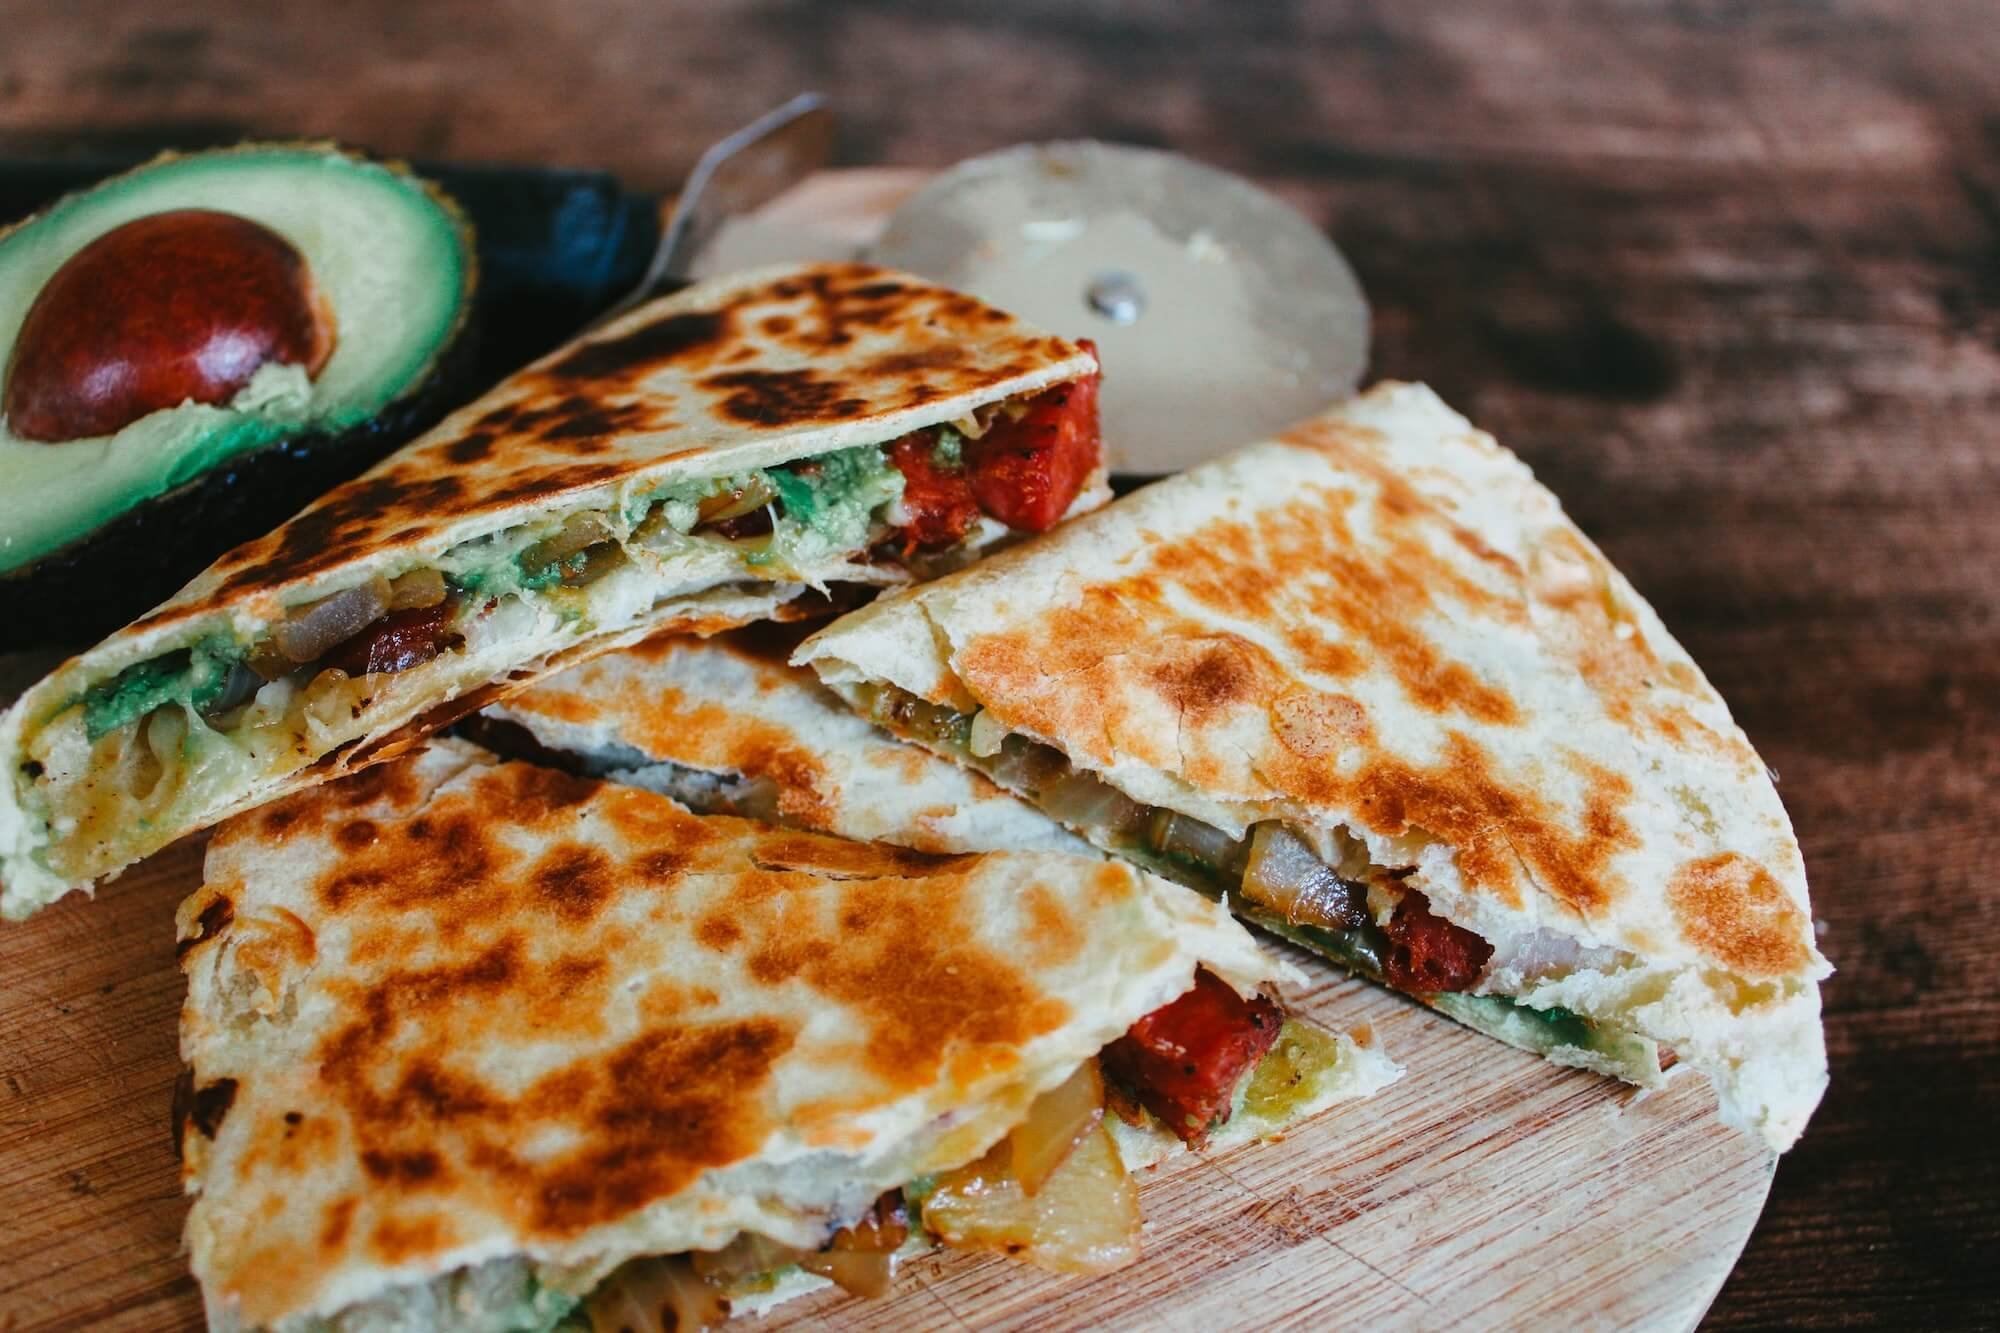 Memo Snavs Meningsfuld The Top 5 Tips for Making the Best Quesadillas Ever | The Cheese Professor